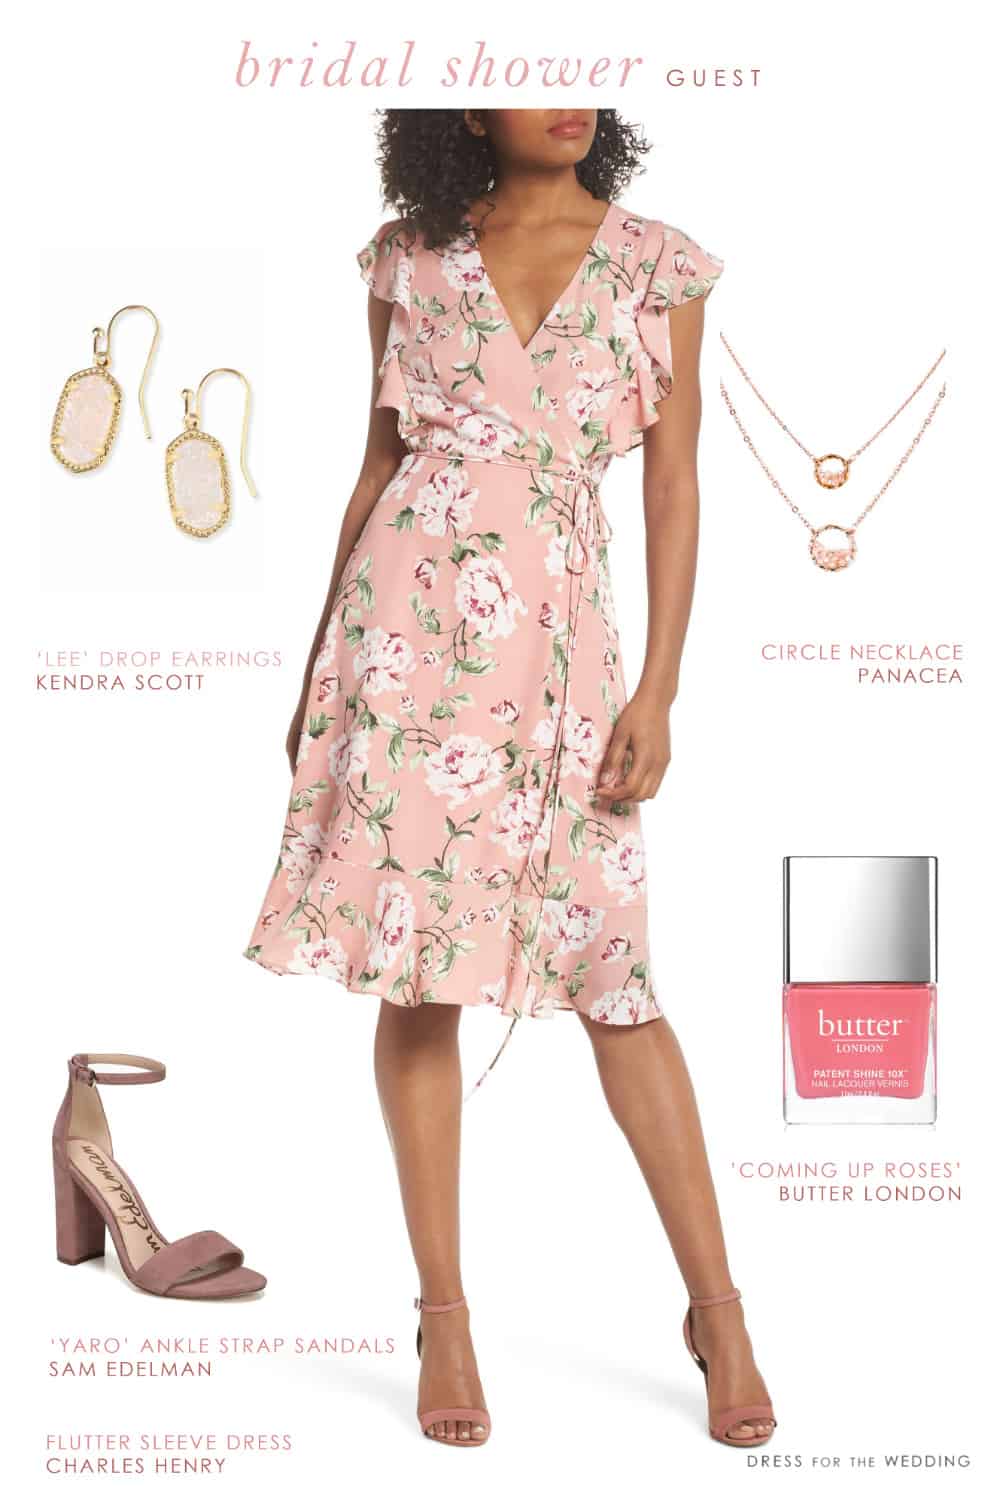 What Should You Wear to A Bridal Shower as a Guest? - Dress for the Wedding